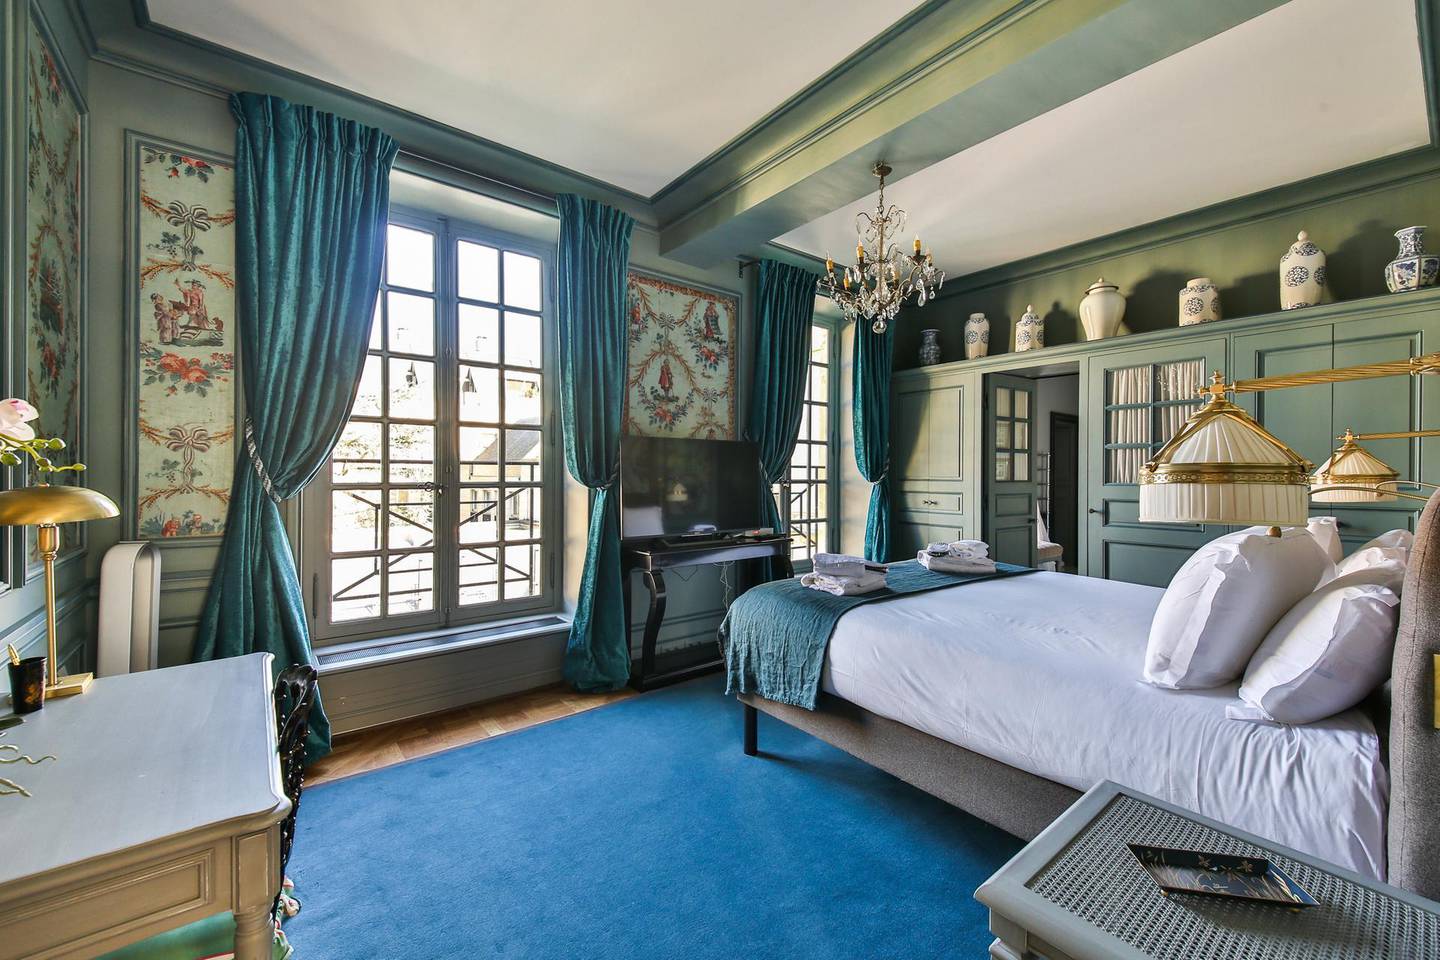 Stay in the heart of the city of love at this 17th-century Airbnb in Paris. Courtesy Airbnb